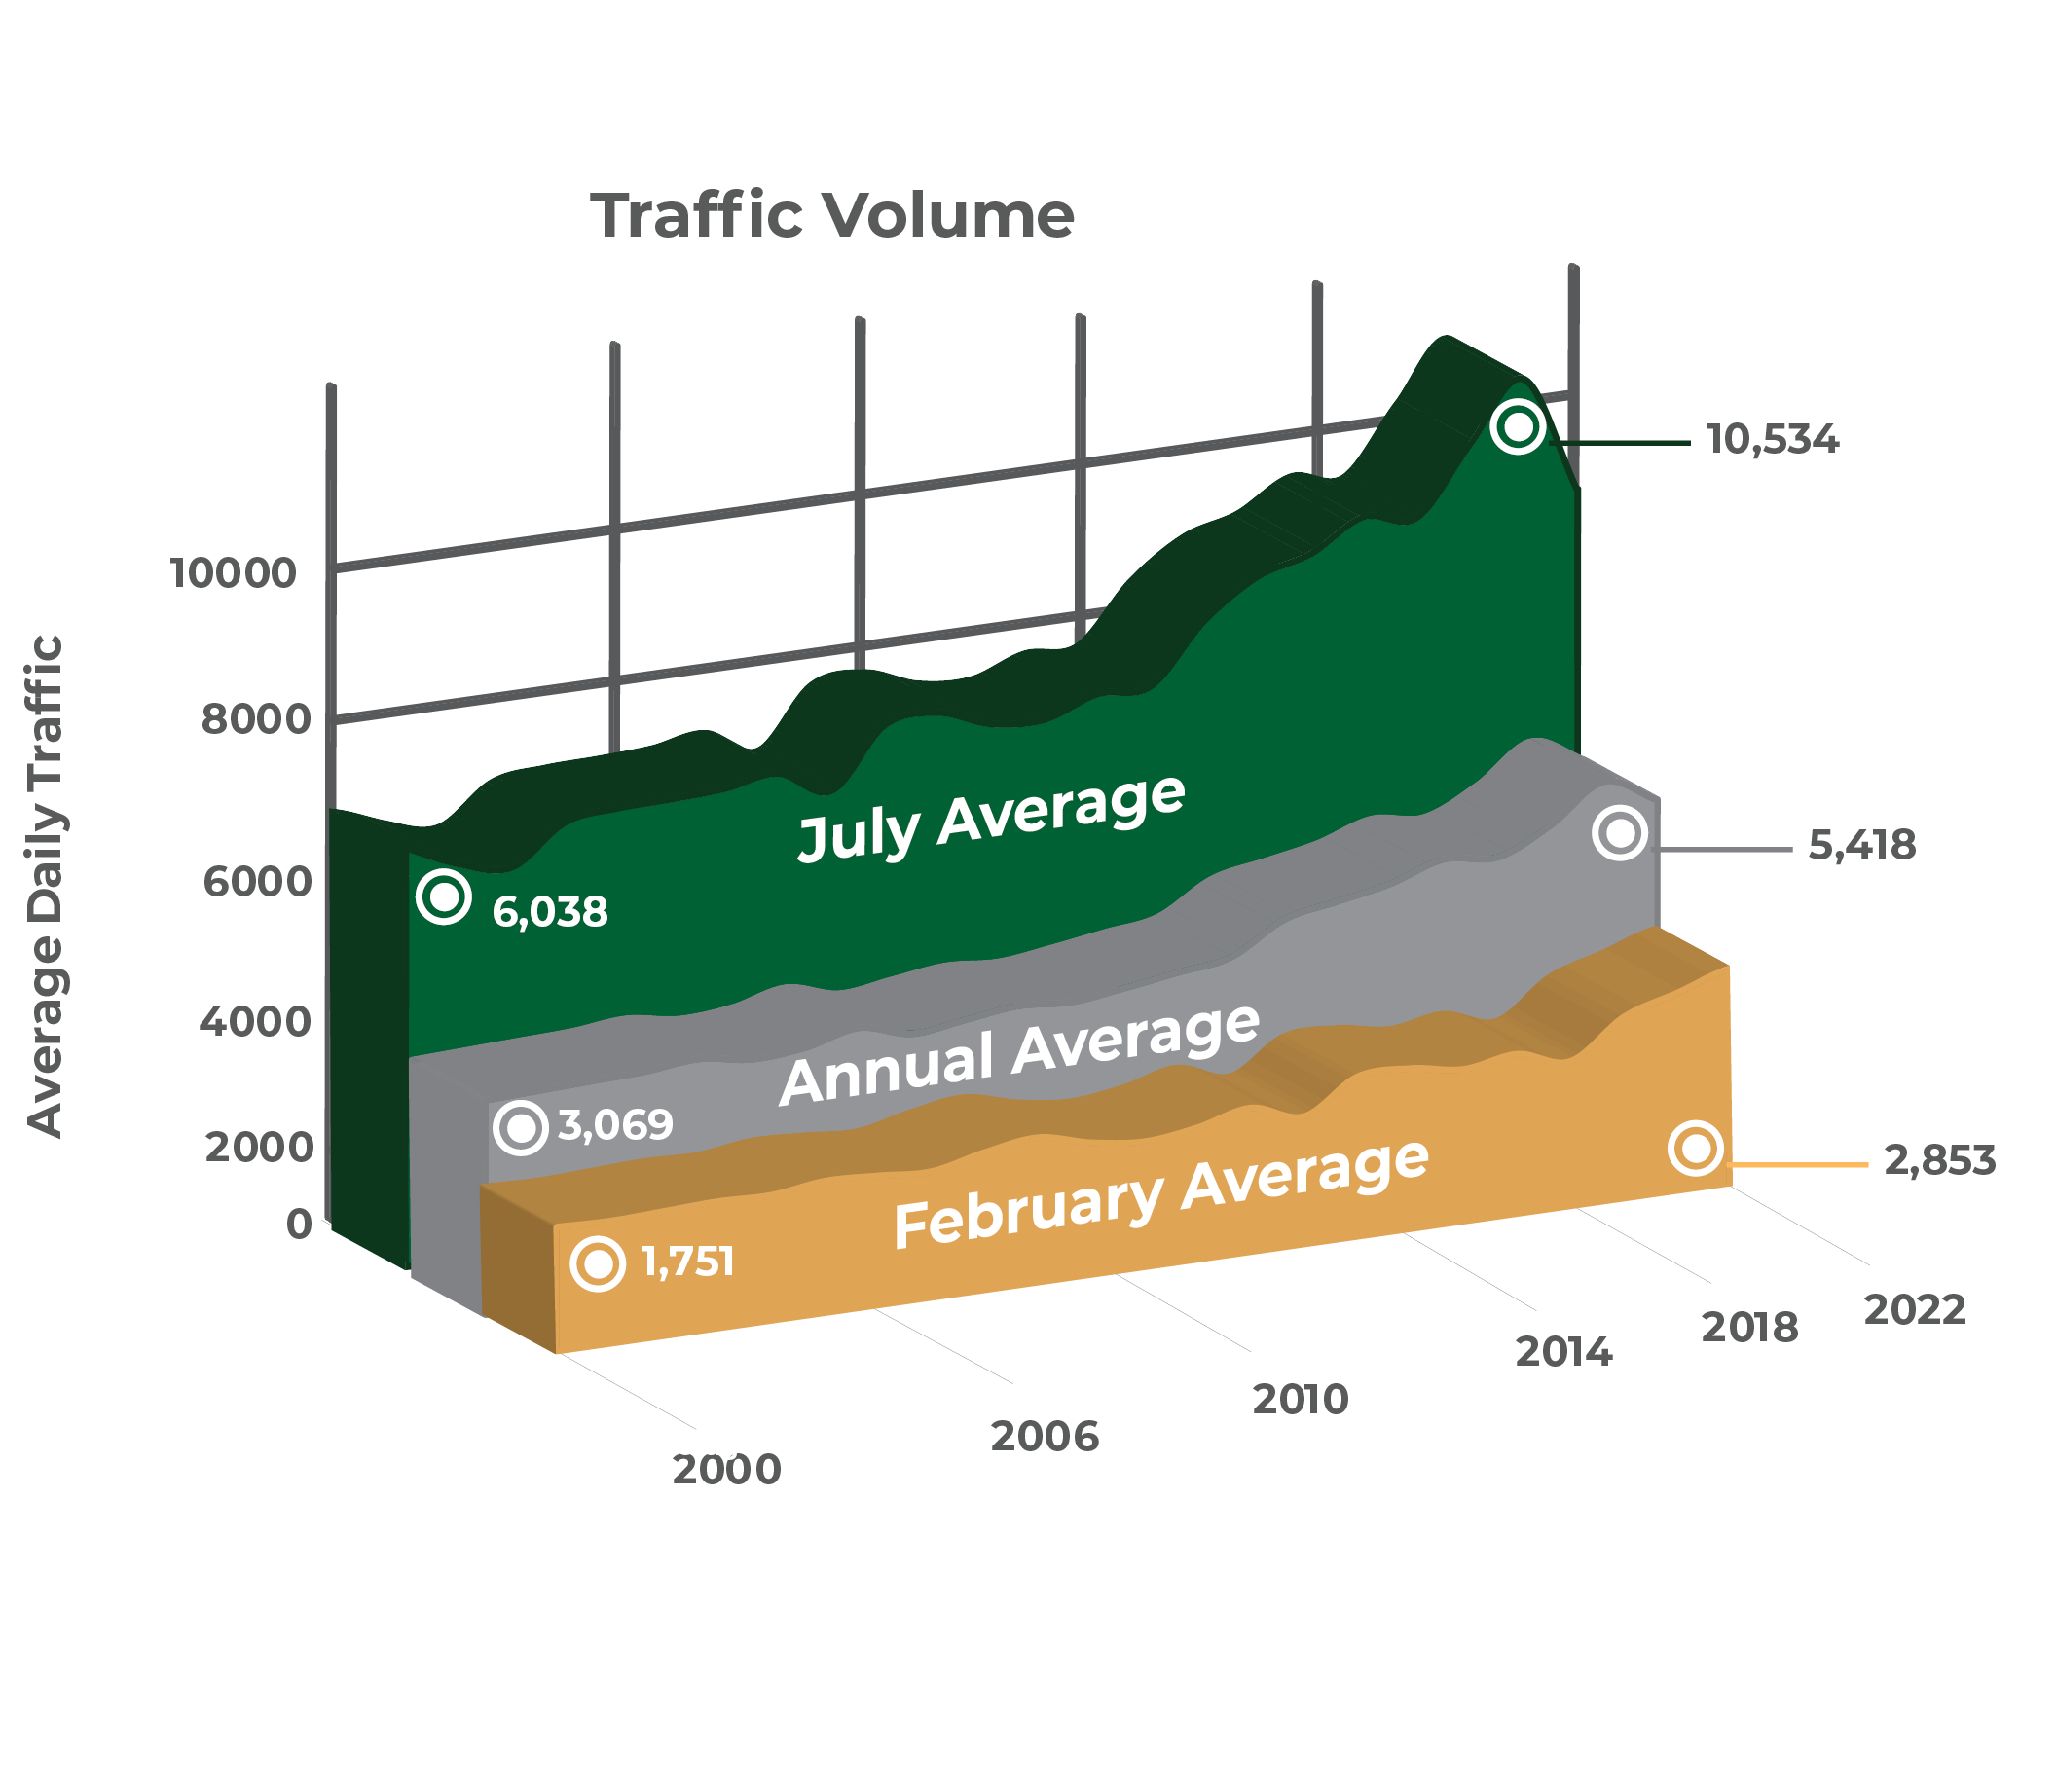 20-year traffic volume from 2002 to 2021. According to the graphic, July has the highest traffic volume increase from 6,038 vehicles in 2002, to 10,534 vehicles in 2021